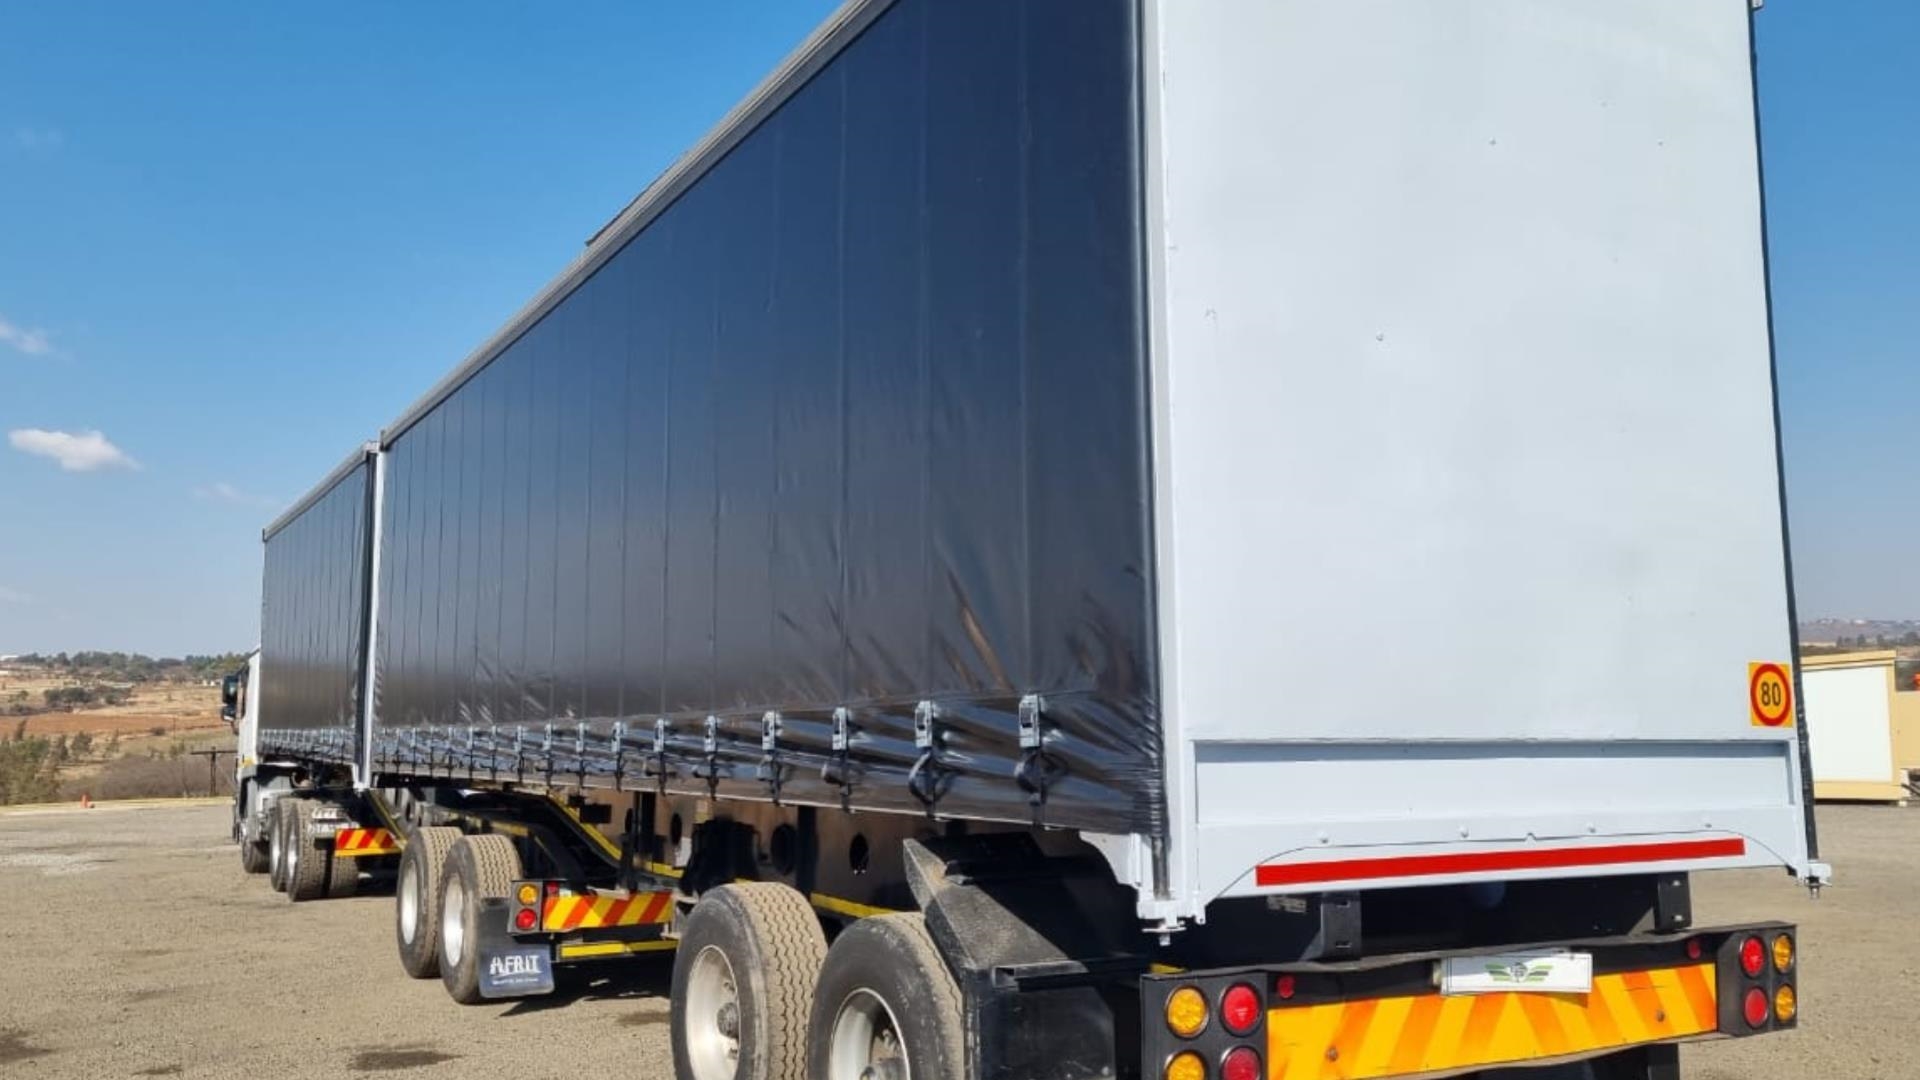 Afrit Trailers 2012 Afrit Tautliner Interlink Trailer 2012 for sale by Truck and Plant Connection | Truck & Trailer Marketplaces